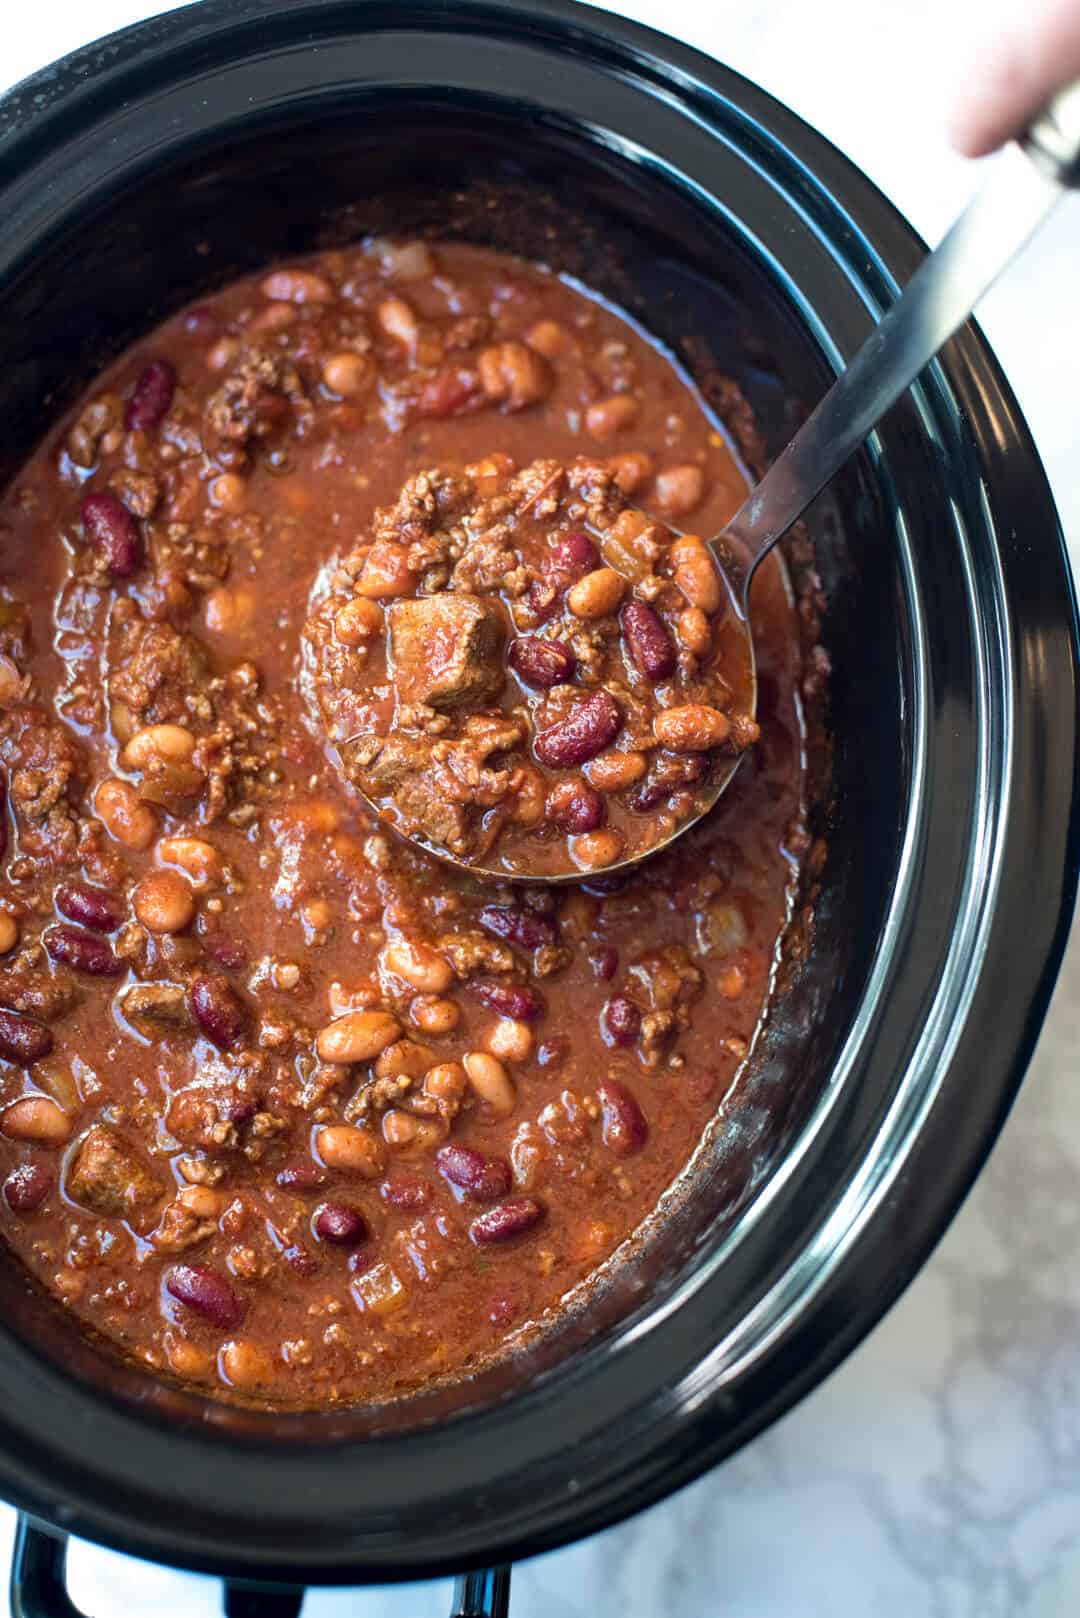 A top down shot of a ladle scooping up chili from a slow cooker.